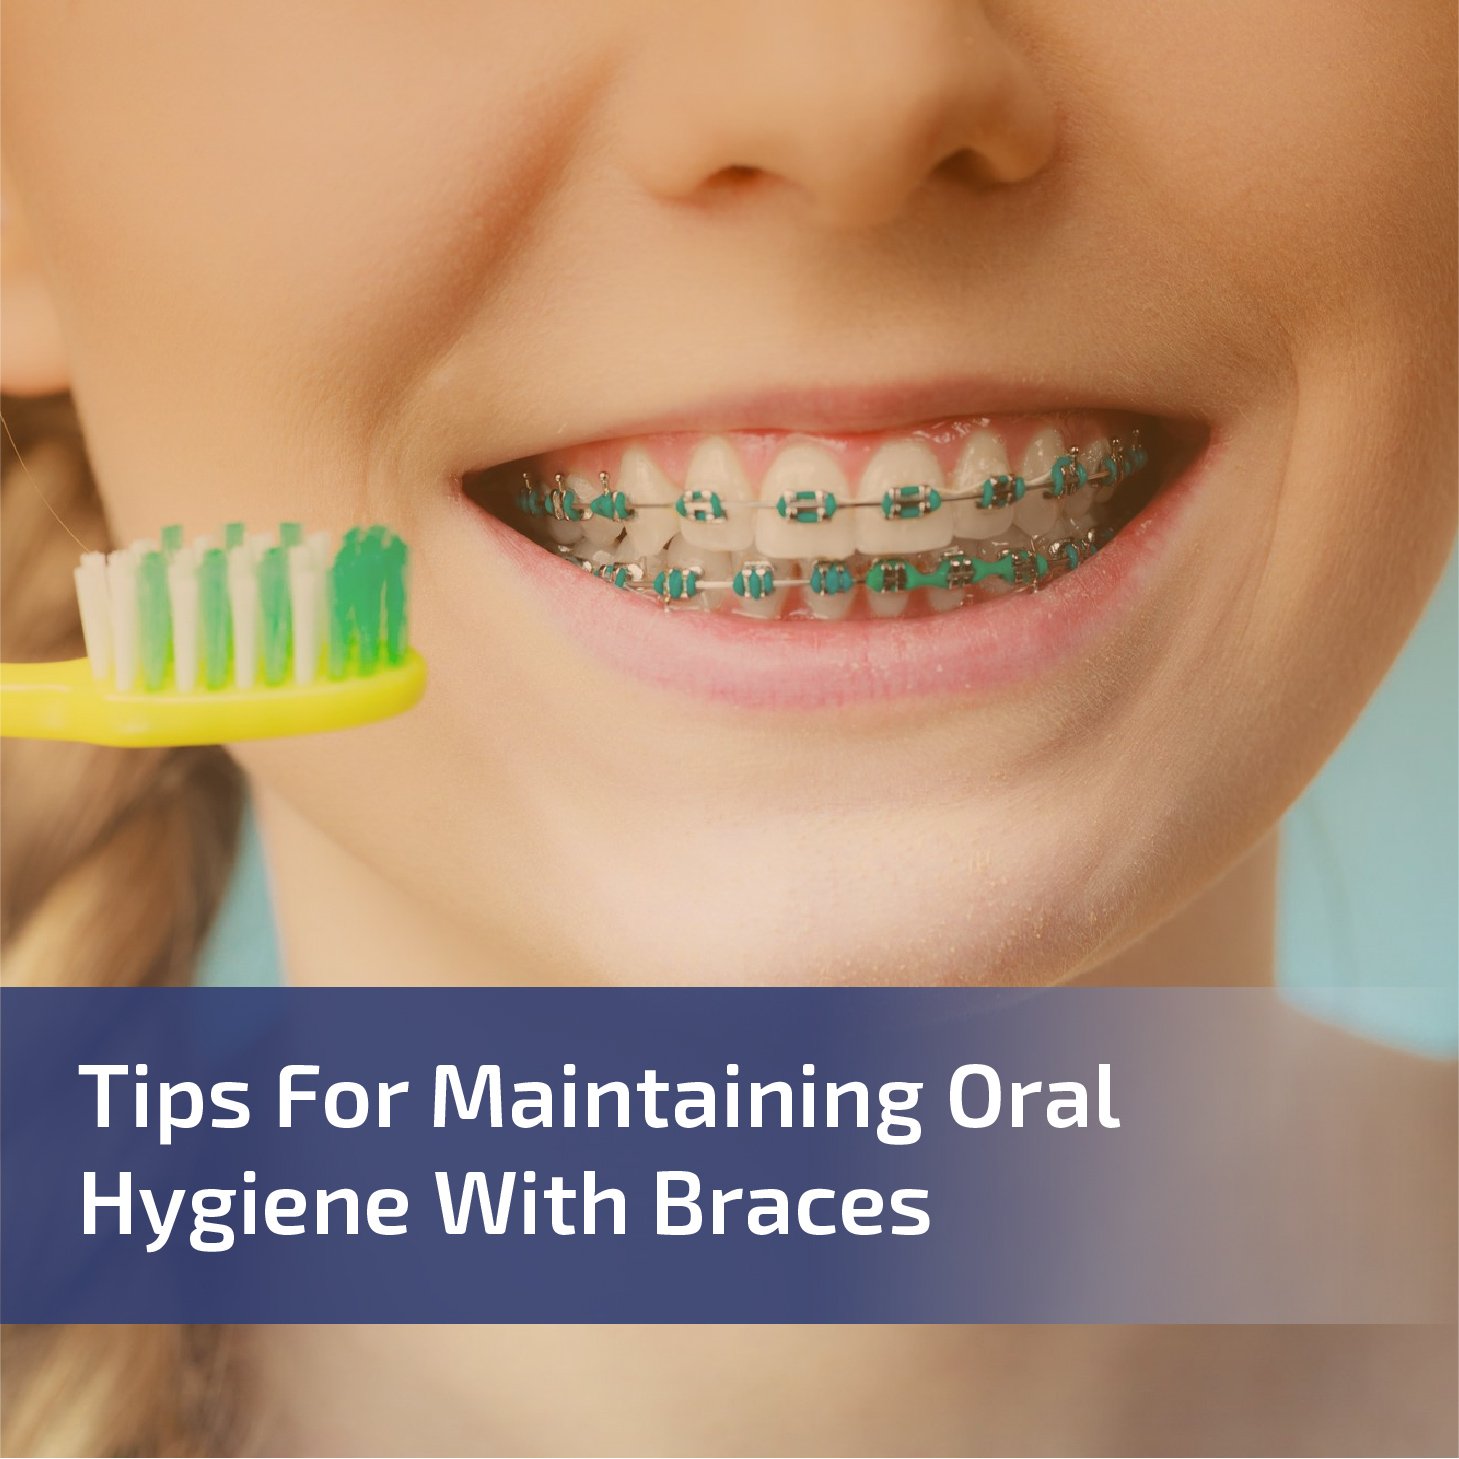 Tips for Maintaining Oral Hygiene With Braces